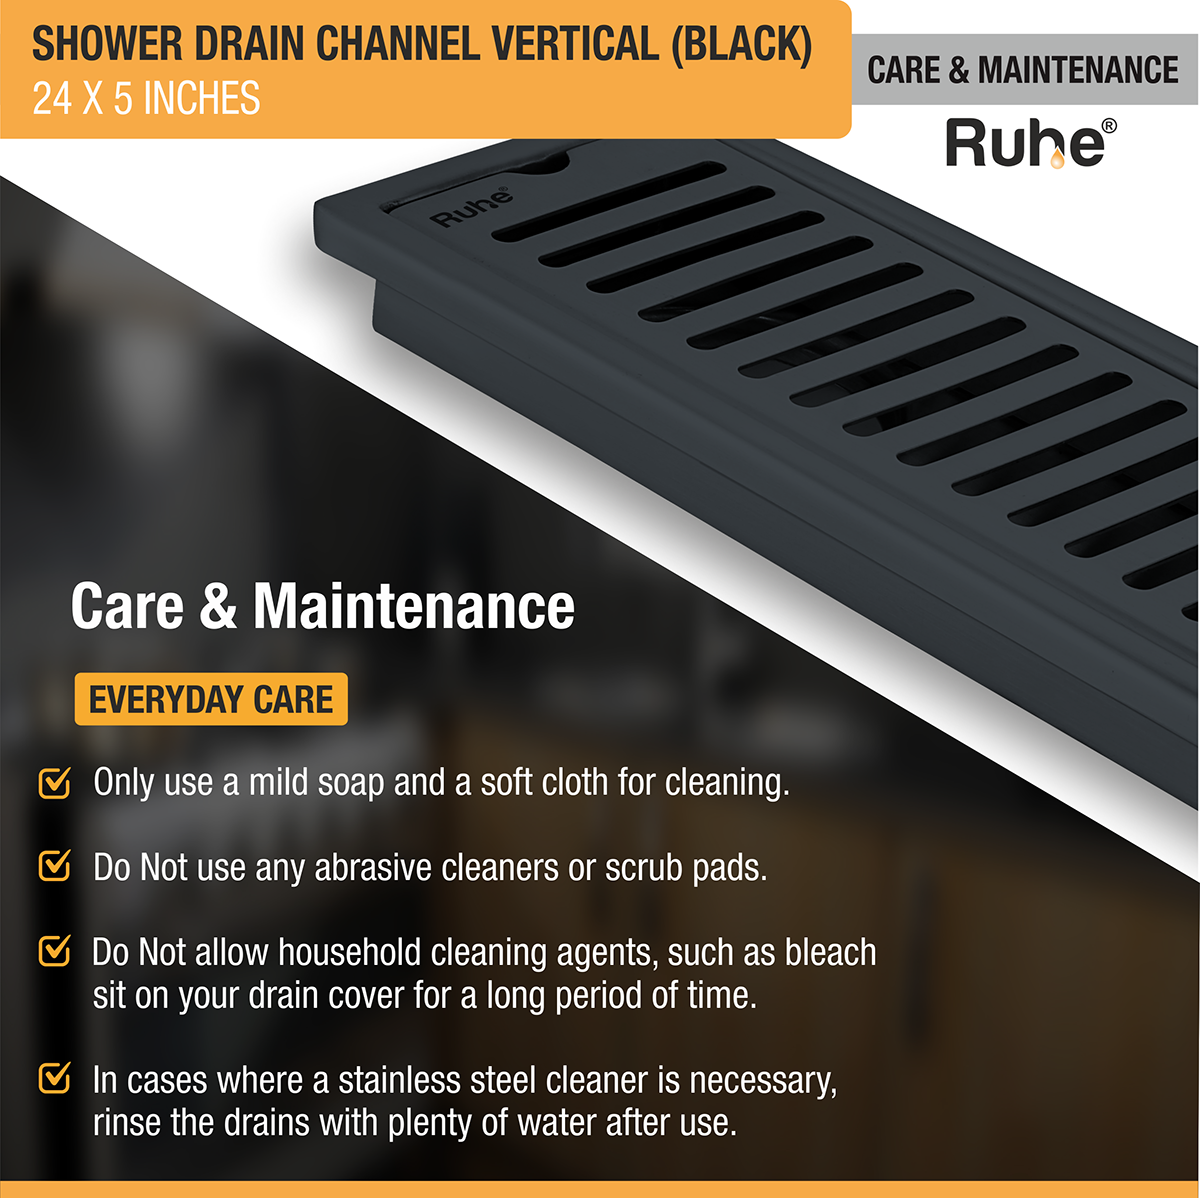 Vertical Shower Drain Channel (24 x 5 Inches) Black PVD Coated care and maintenance